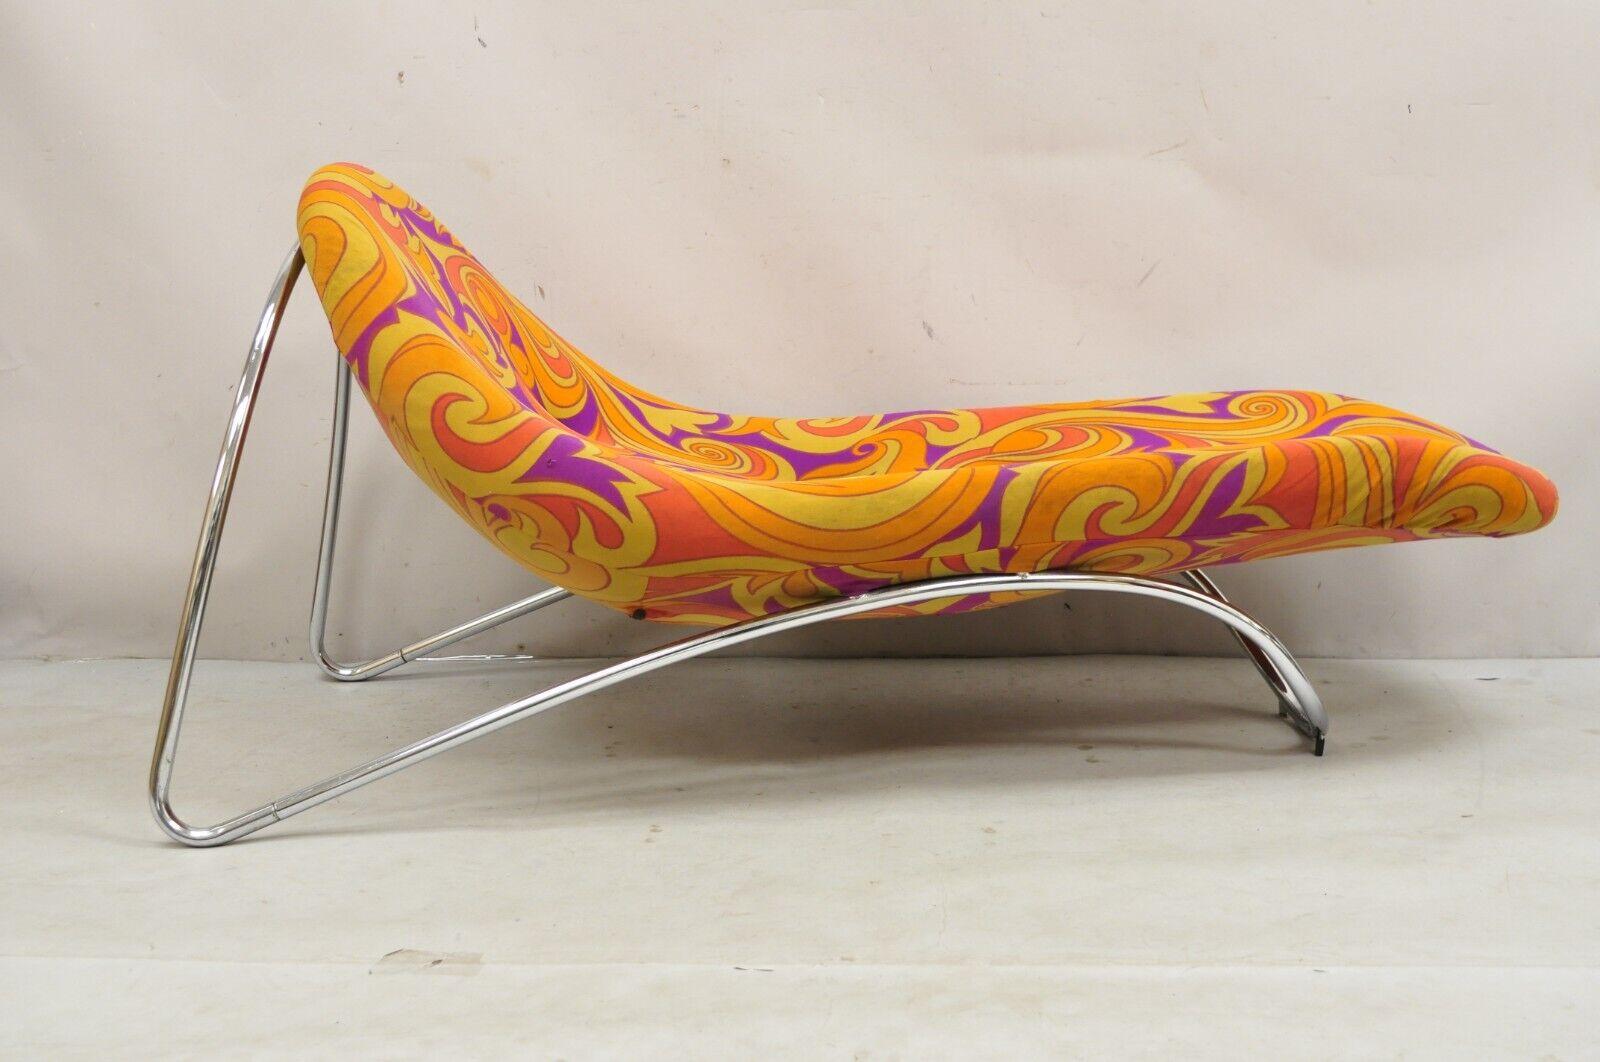 Vintage Mid Century Modern Pierre Paulin Style Groovy Fabric Sculptural Wave Chaise Lounge. Item features a sculptural chrome plated metal frame, original 1960s-70s groovy fabric, clean lines, great style and forms. Circa 1960s/ Measurements: 29